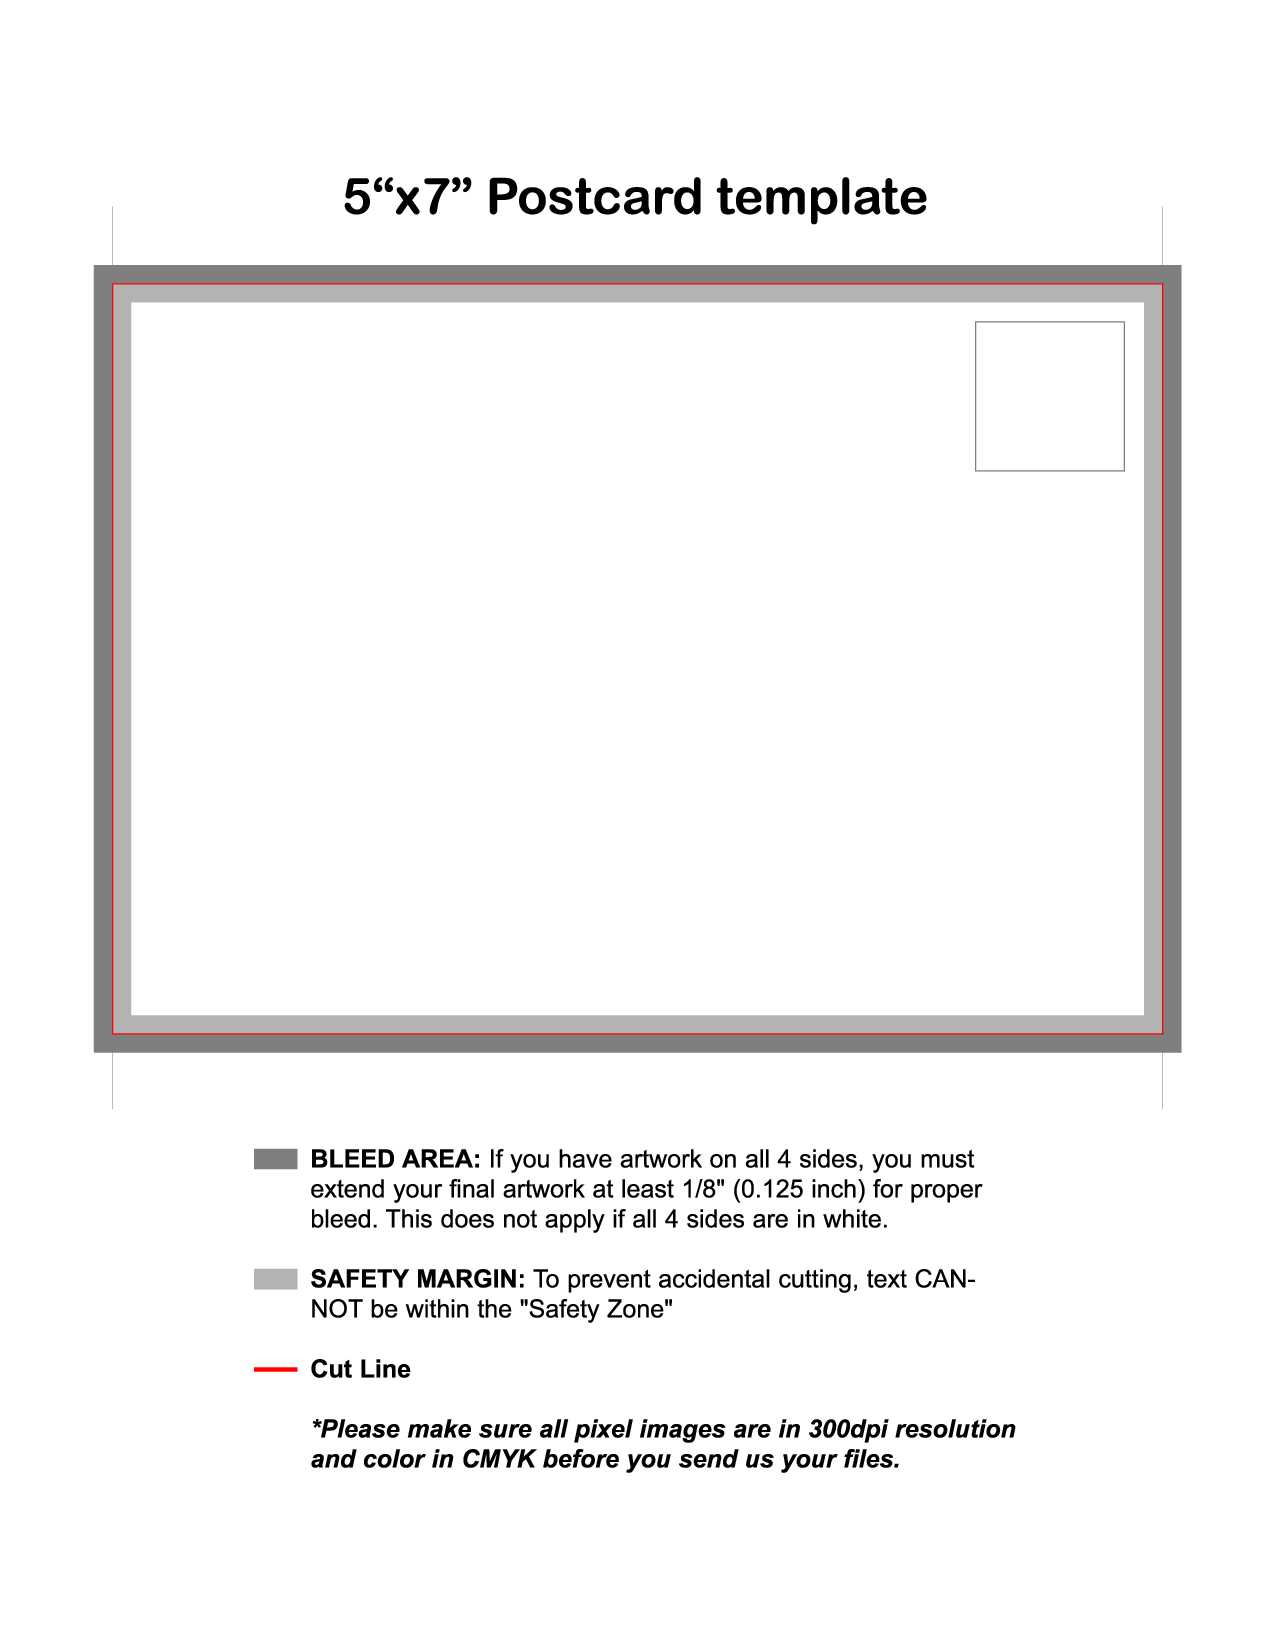 Equity Fax Template Word 2010 – Takub Pertaining To Fax Template Word 2010